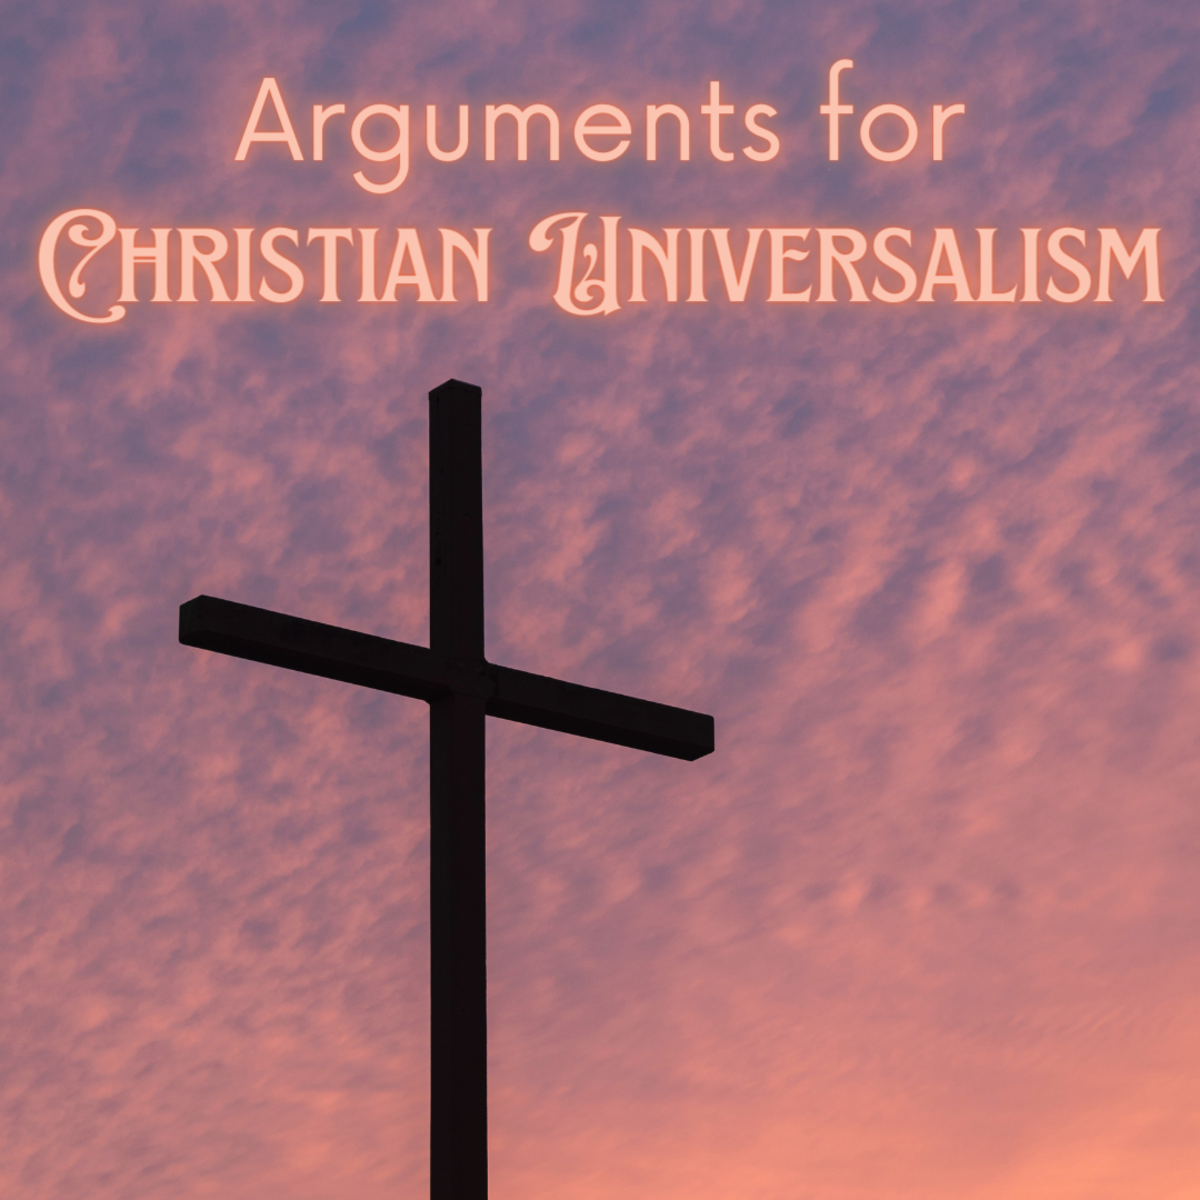 An Argument for Christian Universalism: Why I Don't Believe in an Eternal Hell